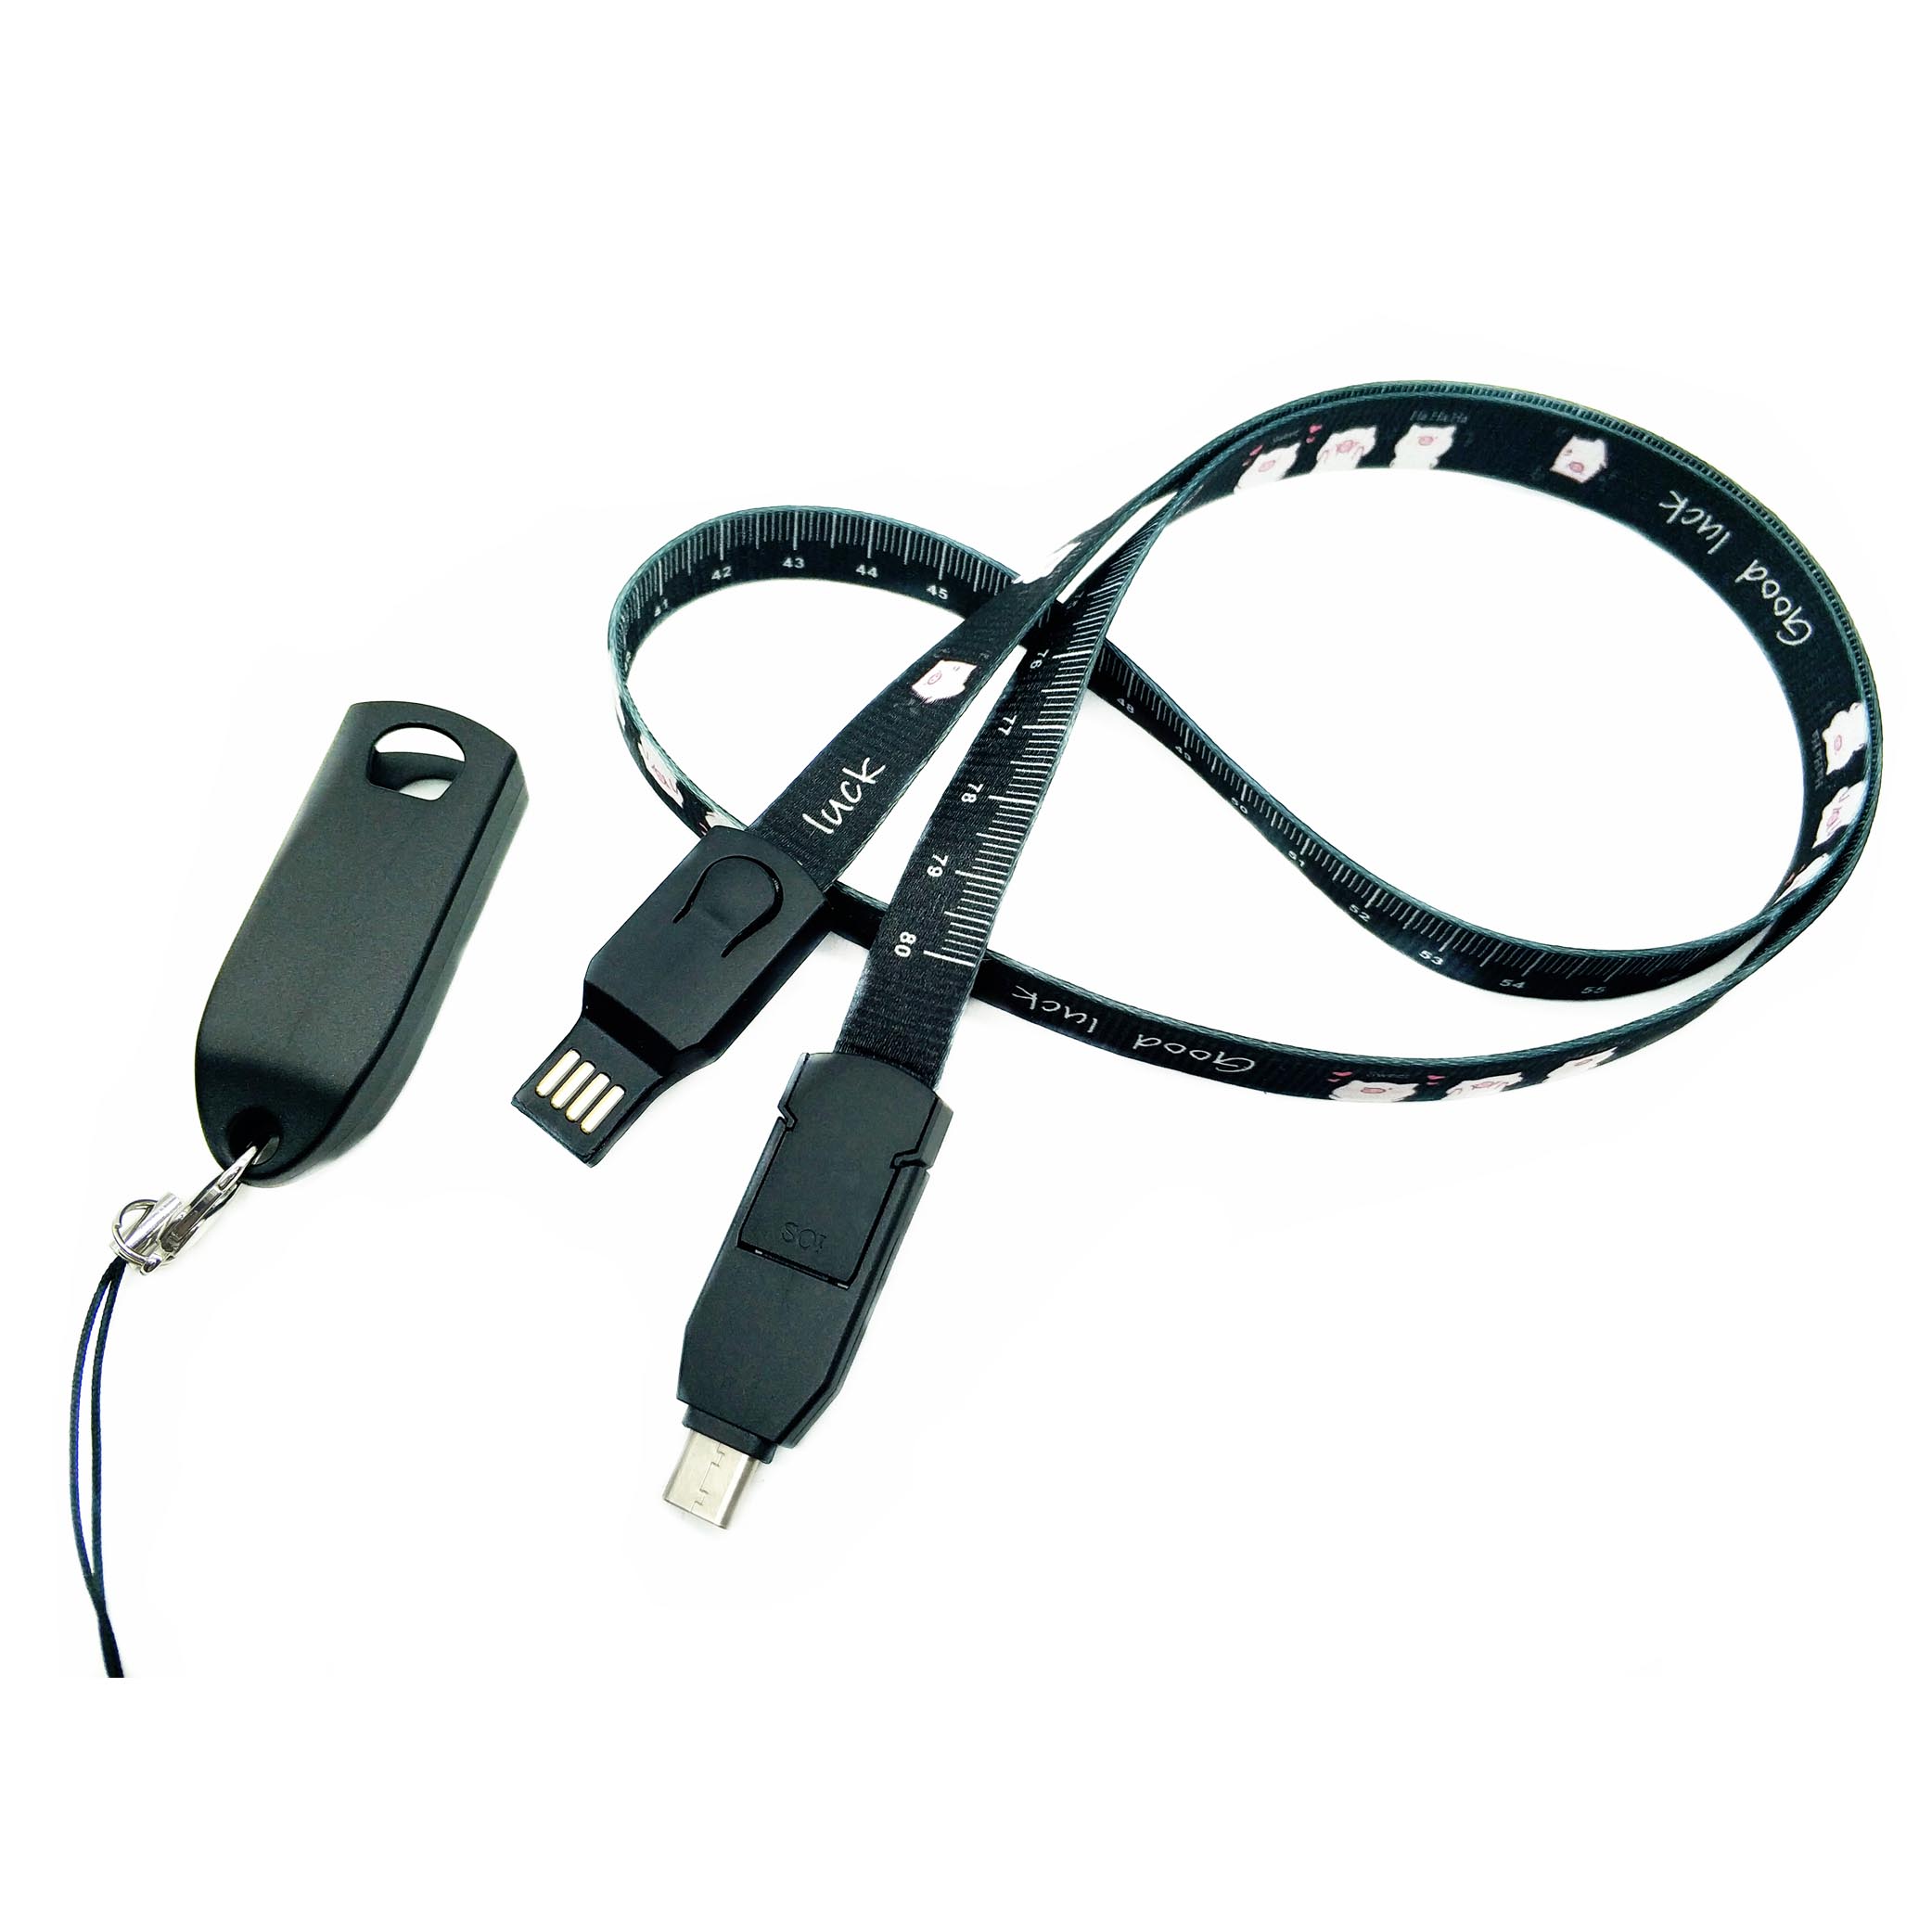 3 in 1 Multi Connector USB Lanyard Charging Cable